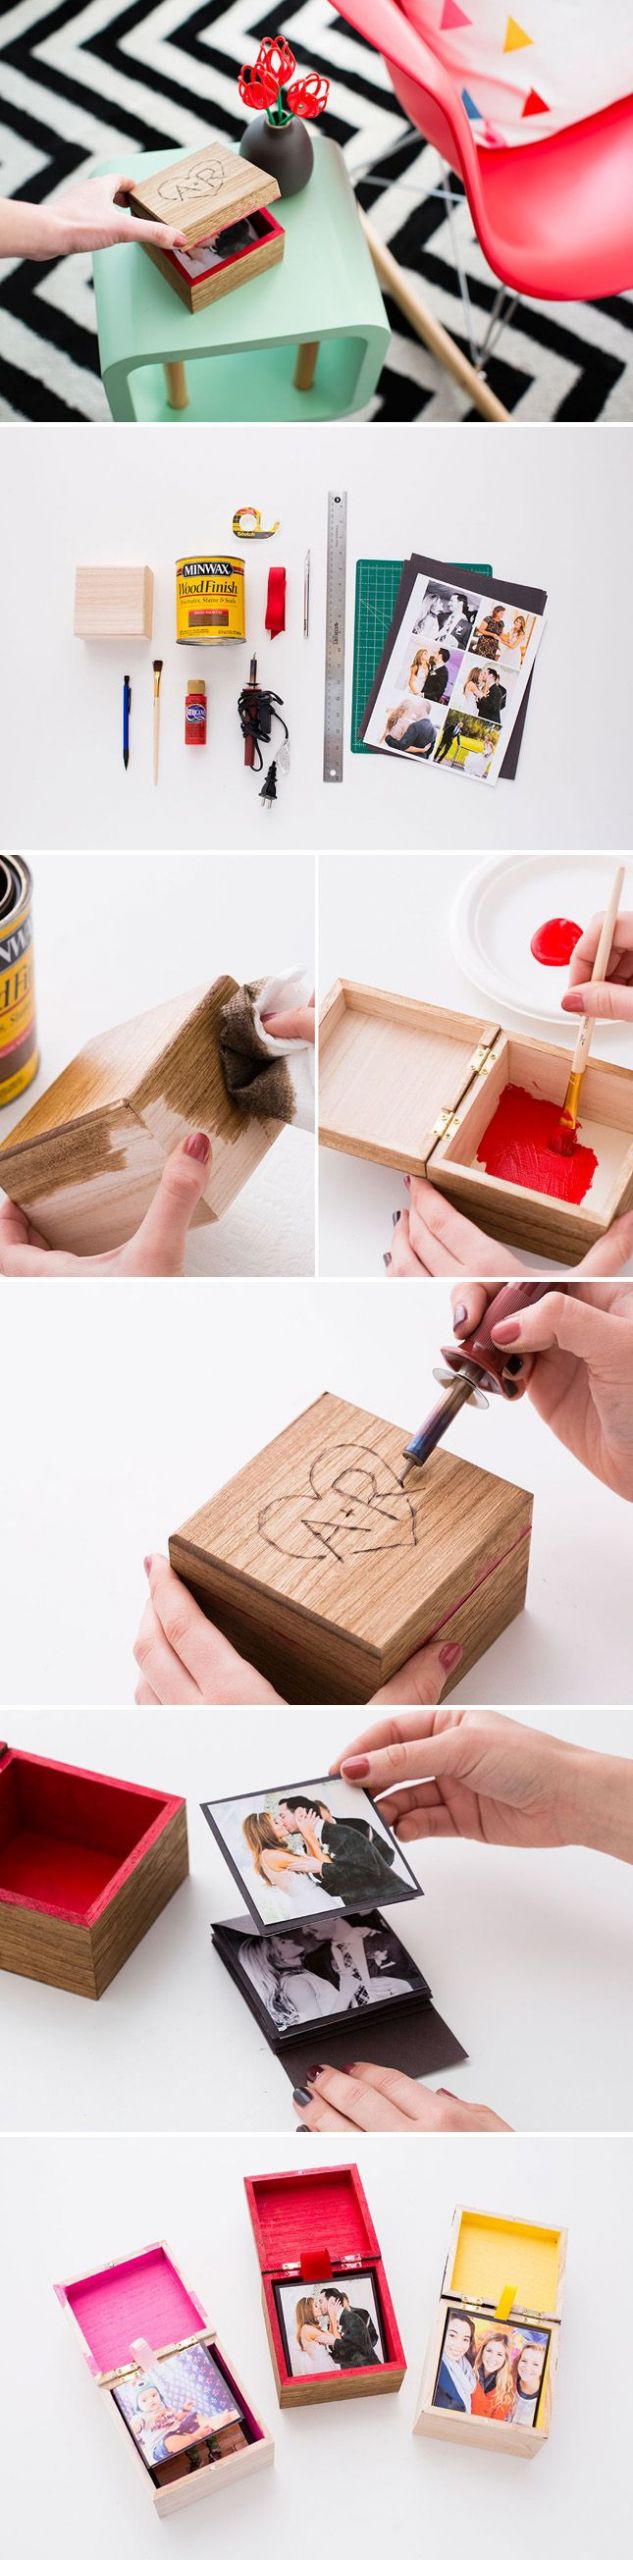 Homemade Birthday Gifts For Boyfriend
 How to Make a Pop Up Box for Your Special Shutterbug